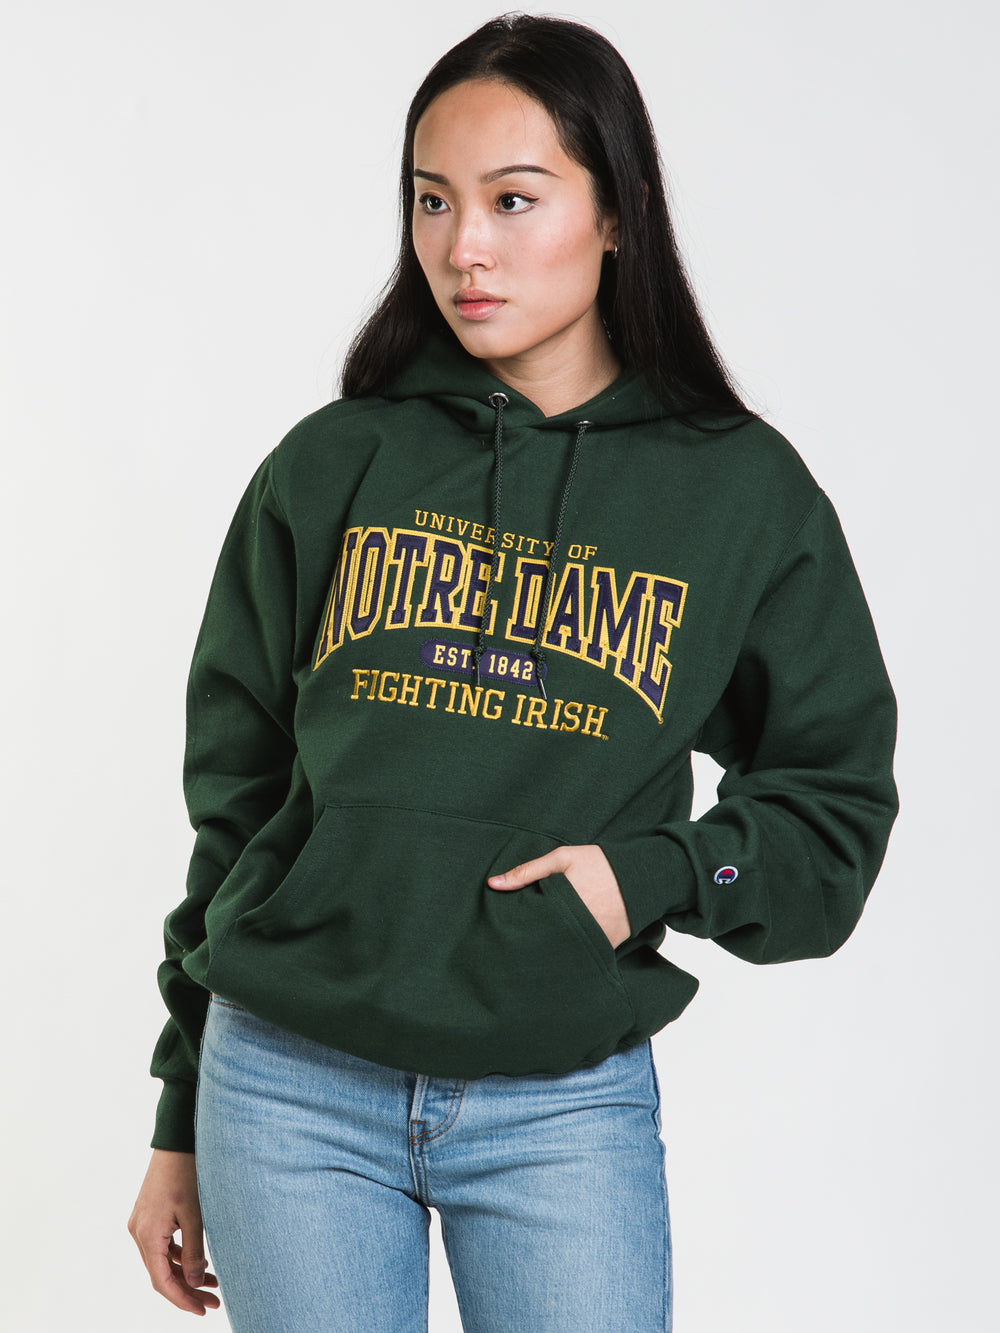 CHAMPION ECO POWERBLEND U of ND PULL OVER HOODIE - CLEARANCE